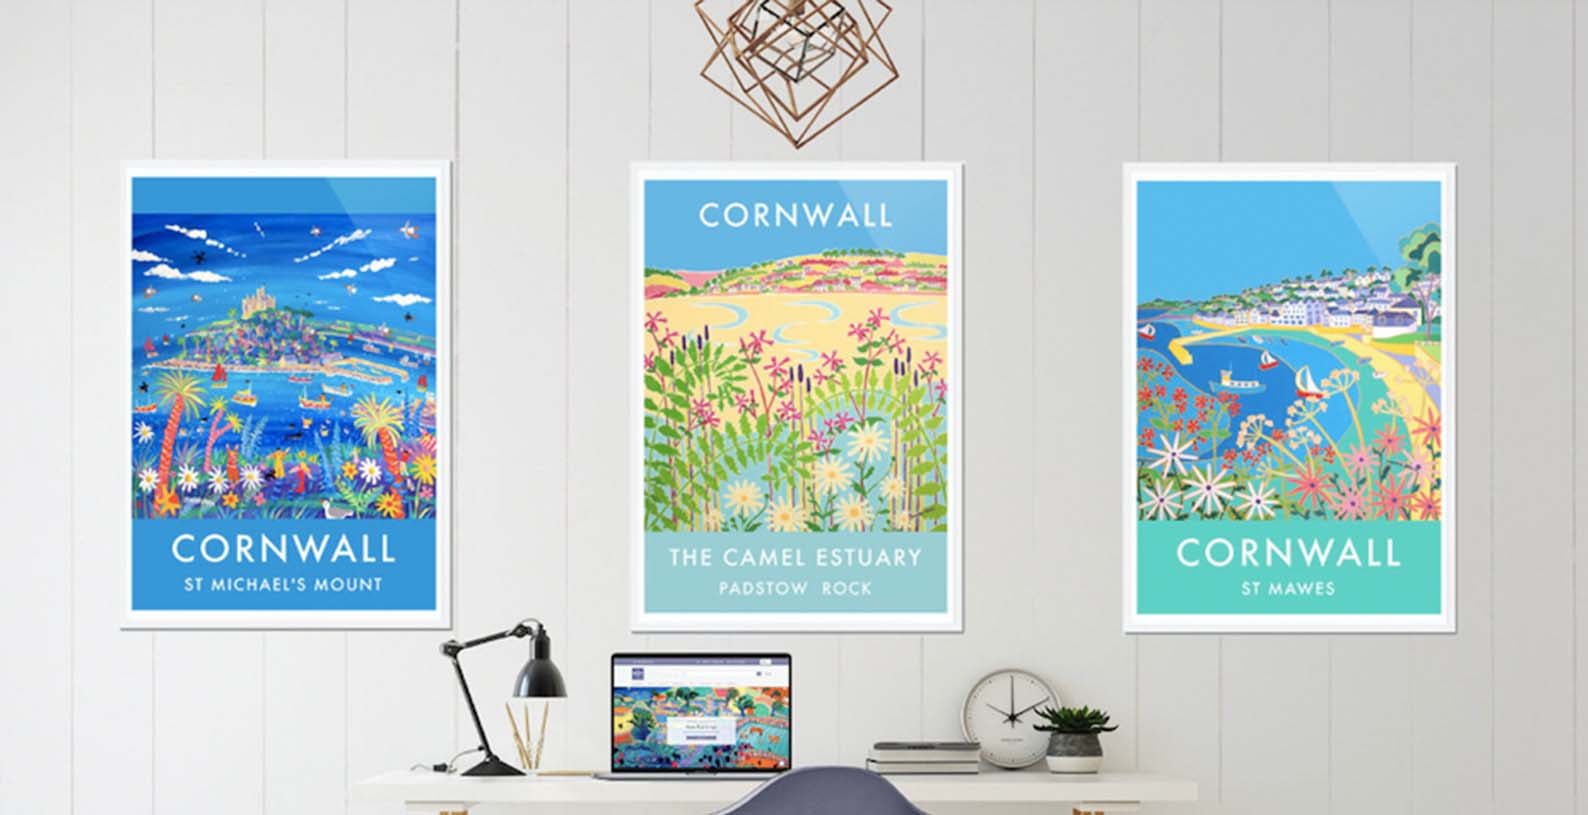 The John Dyer Gallery Co wall art products by Prodigi